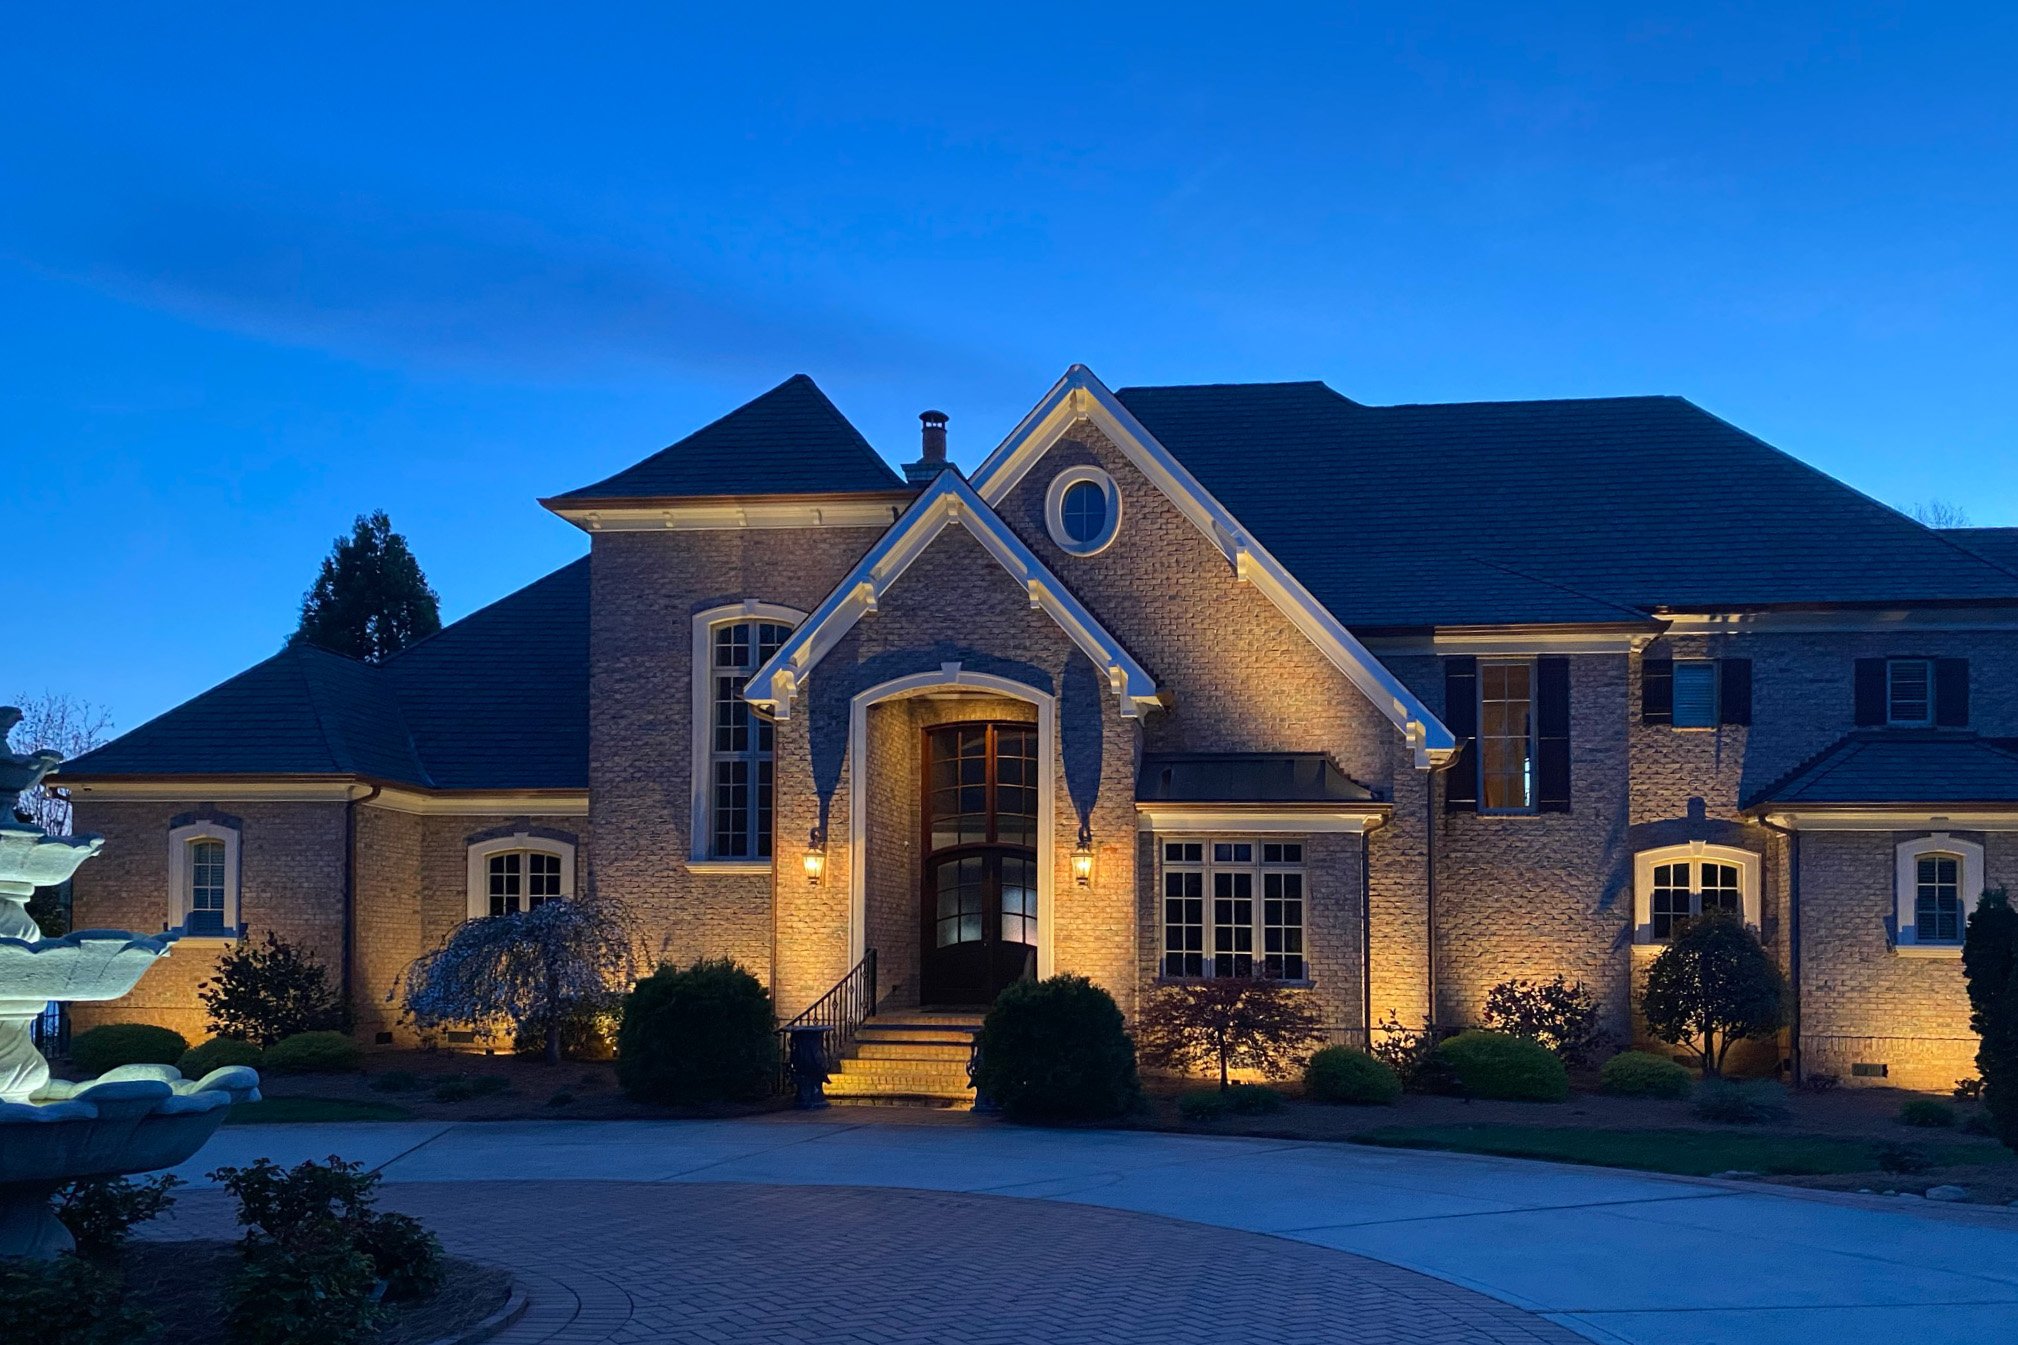  Large, light colored brick home with architectural up lighting and landscape lighting. 